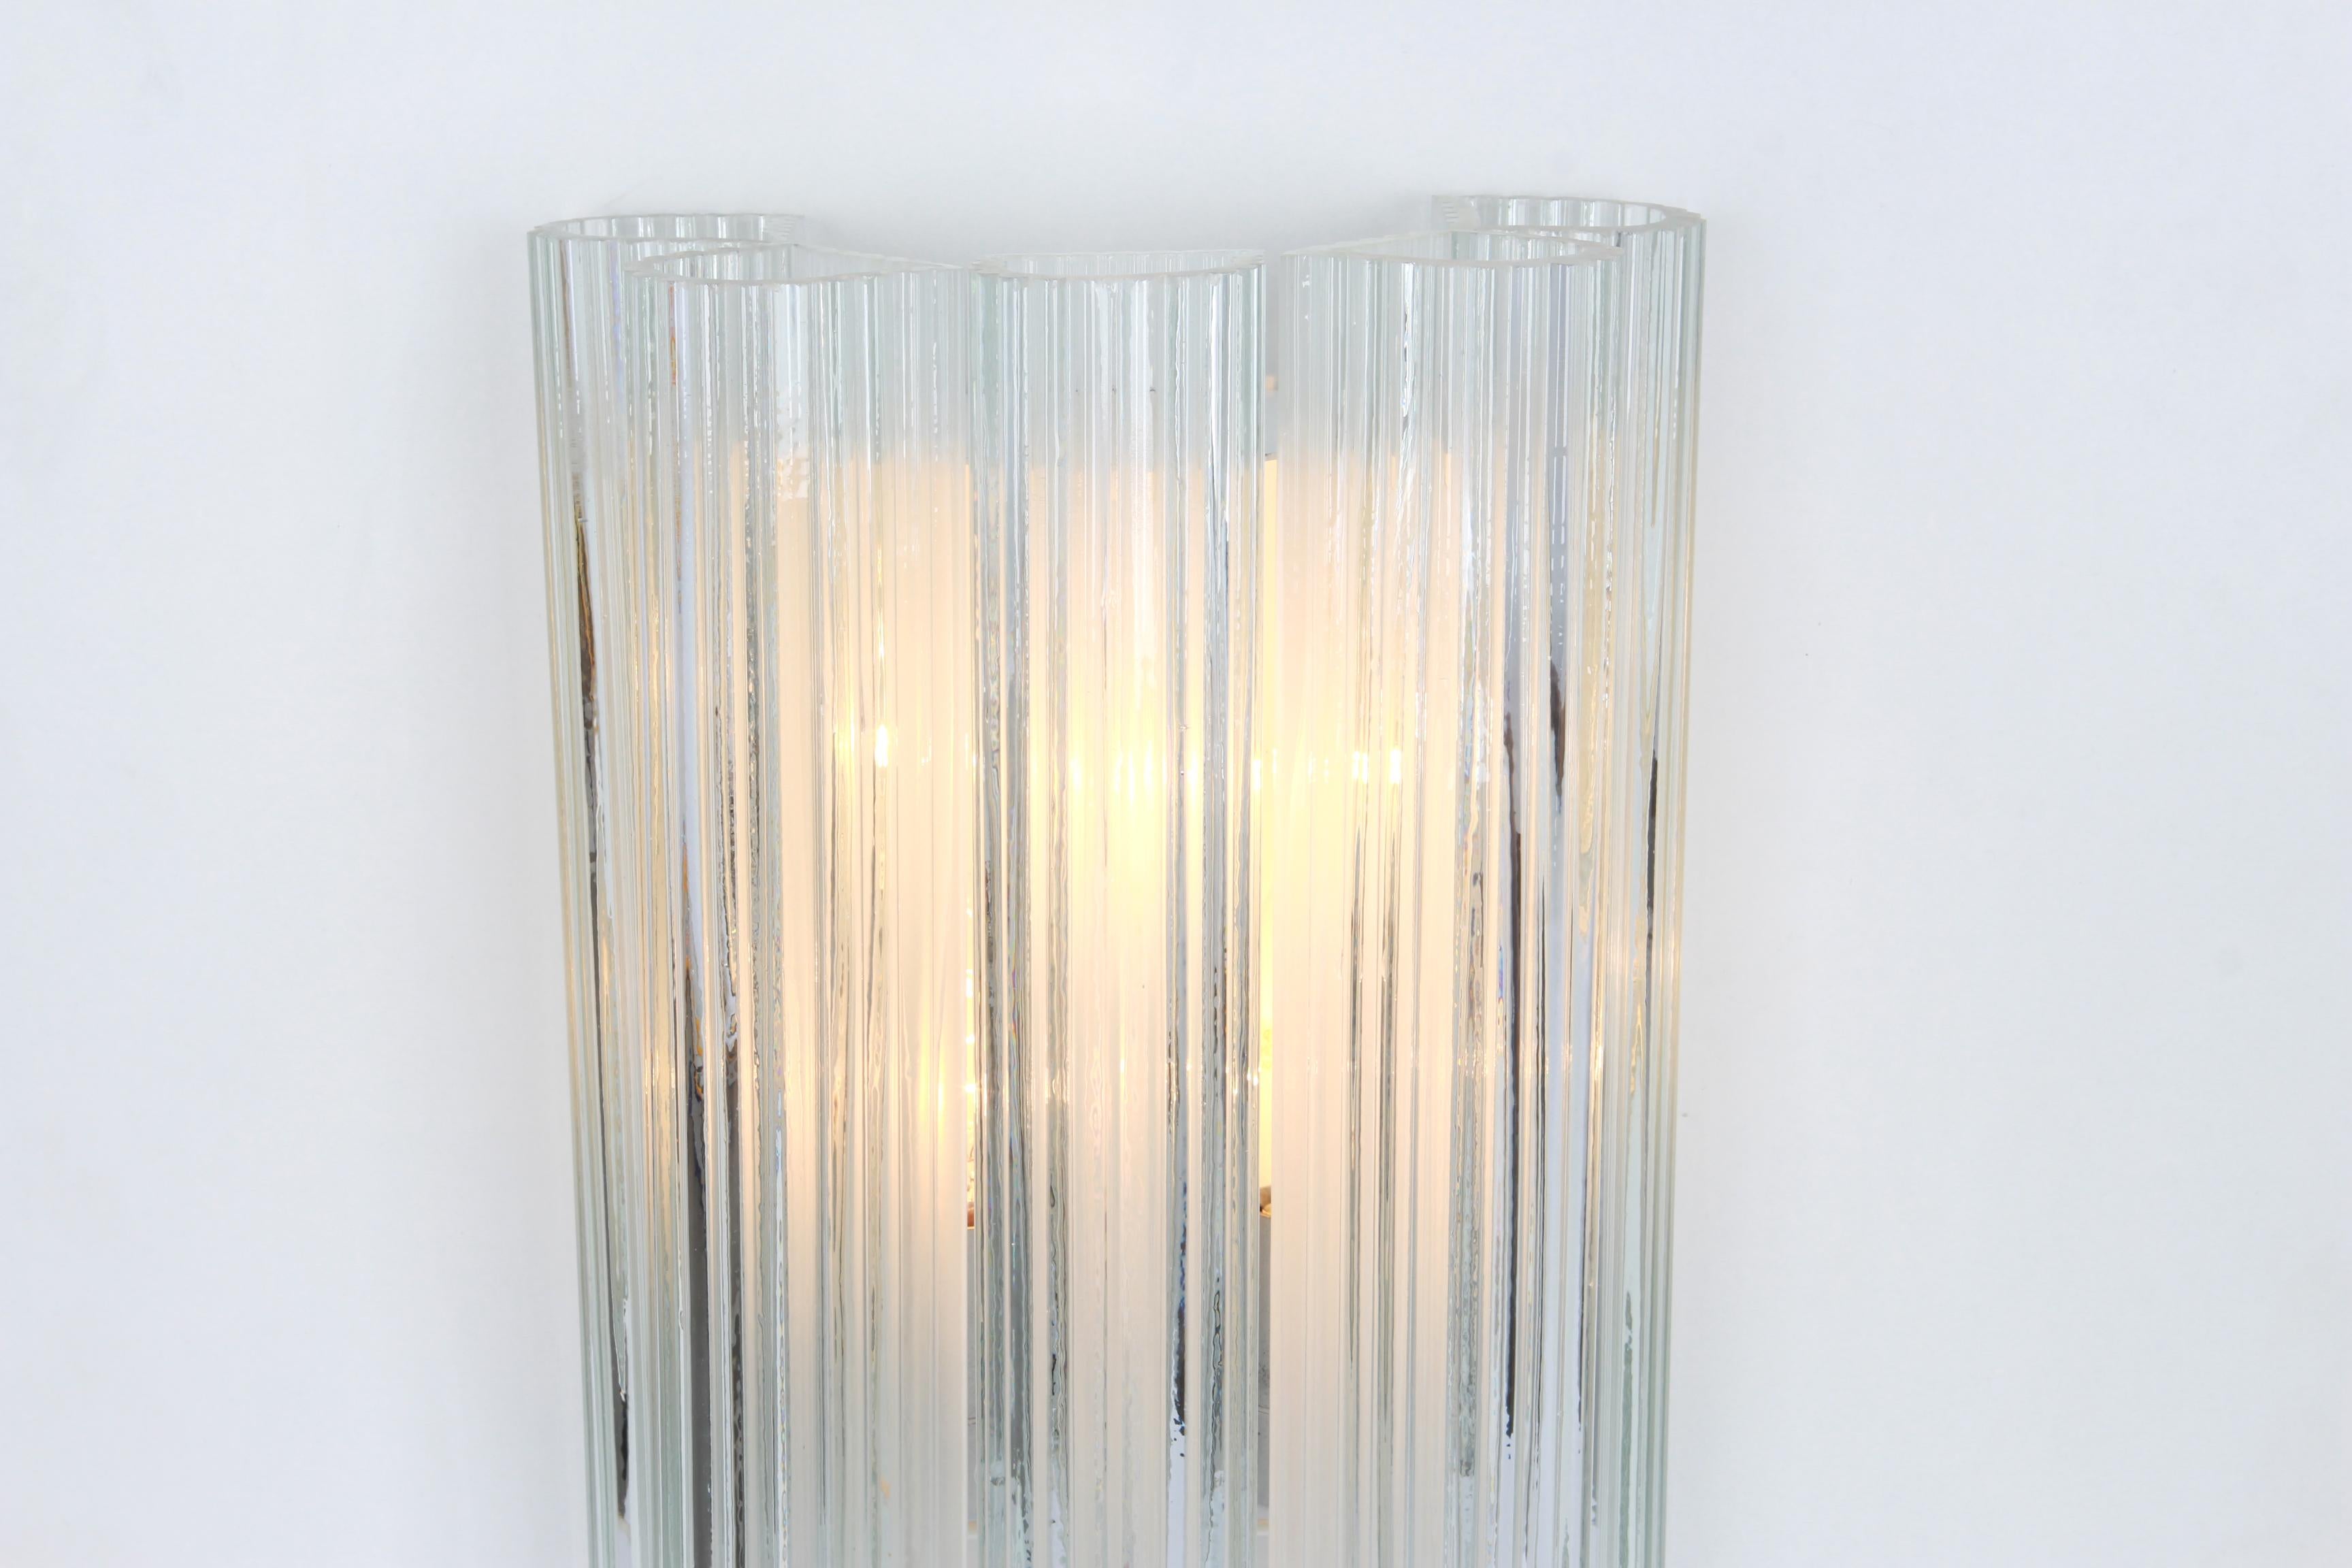 1 of 4 Large Murano Glass Wall Sconces by Doria, Germany, 1960s For Sale 2